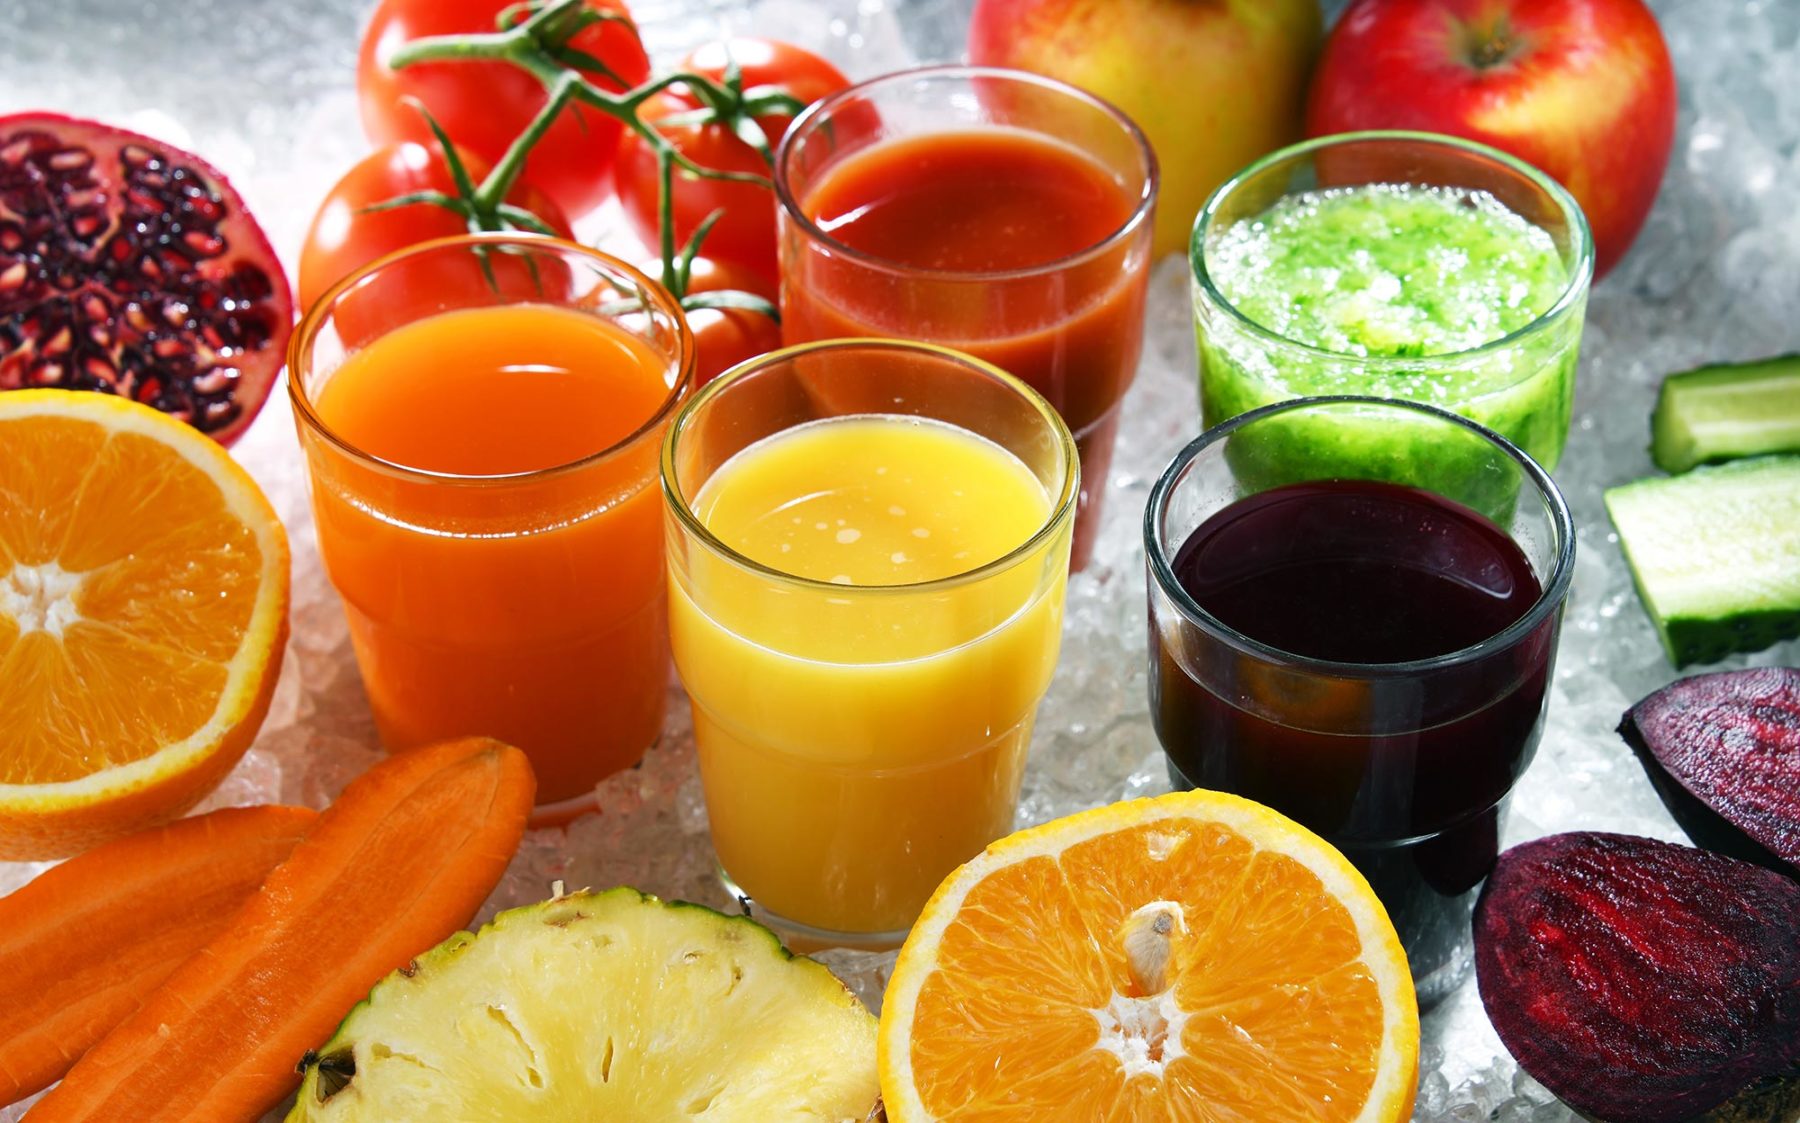 Fresh-pressed juices are a great source of easy-to-access nutrients